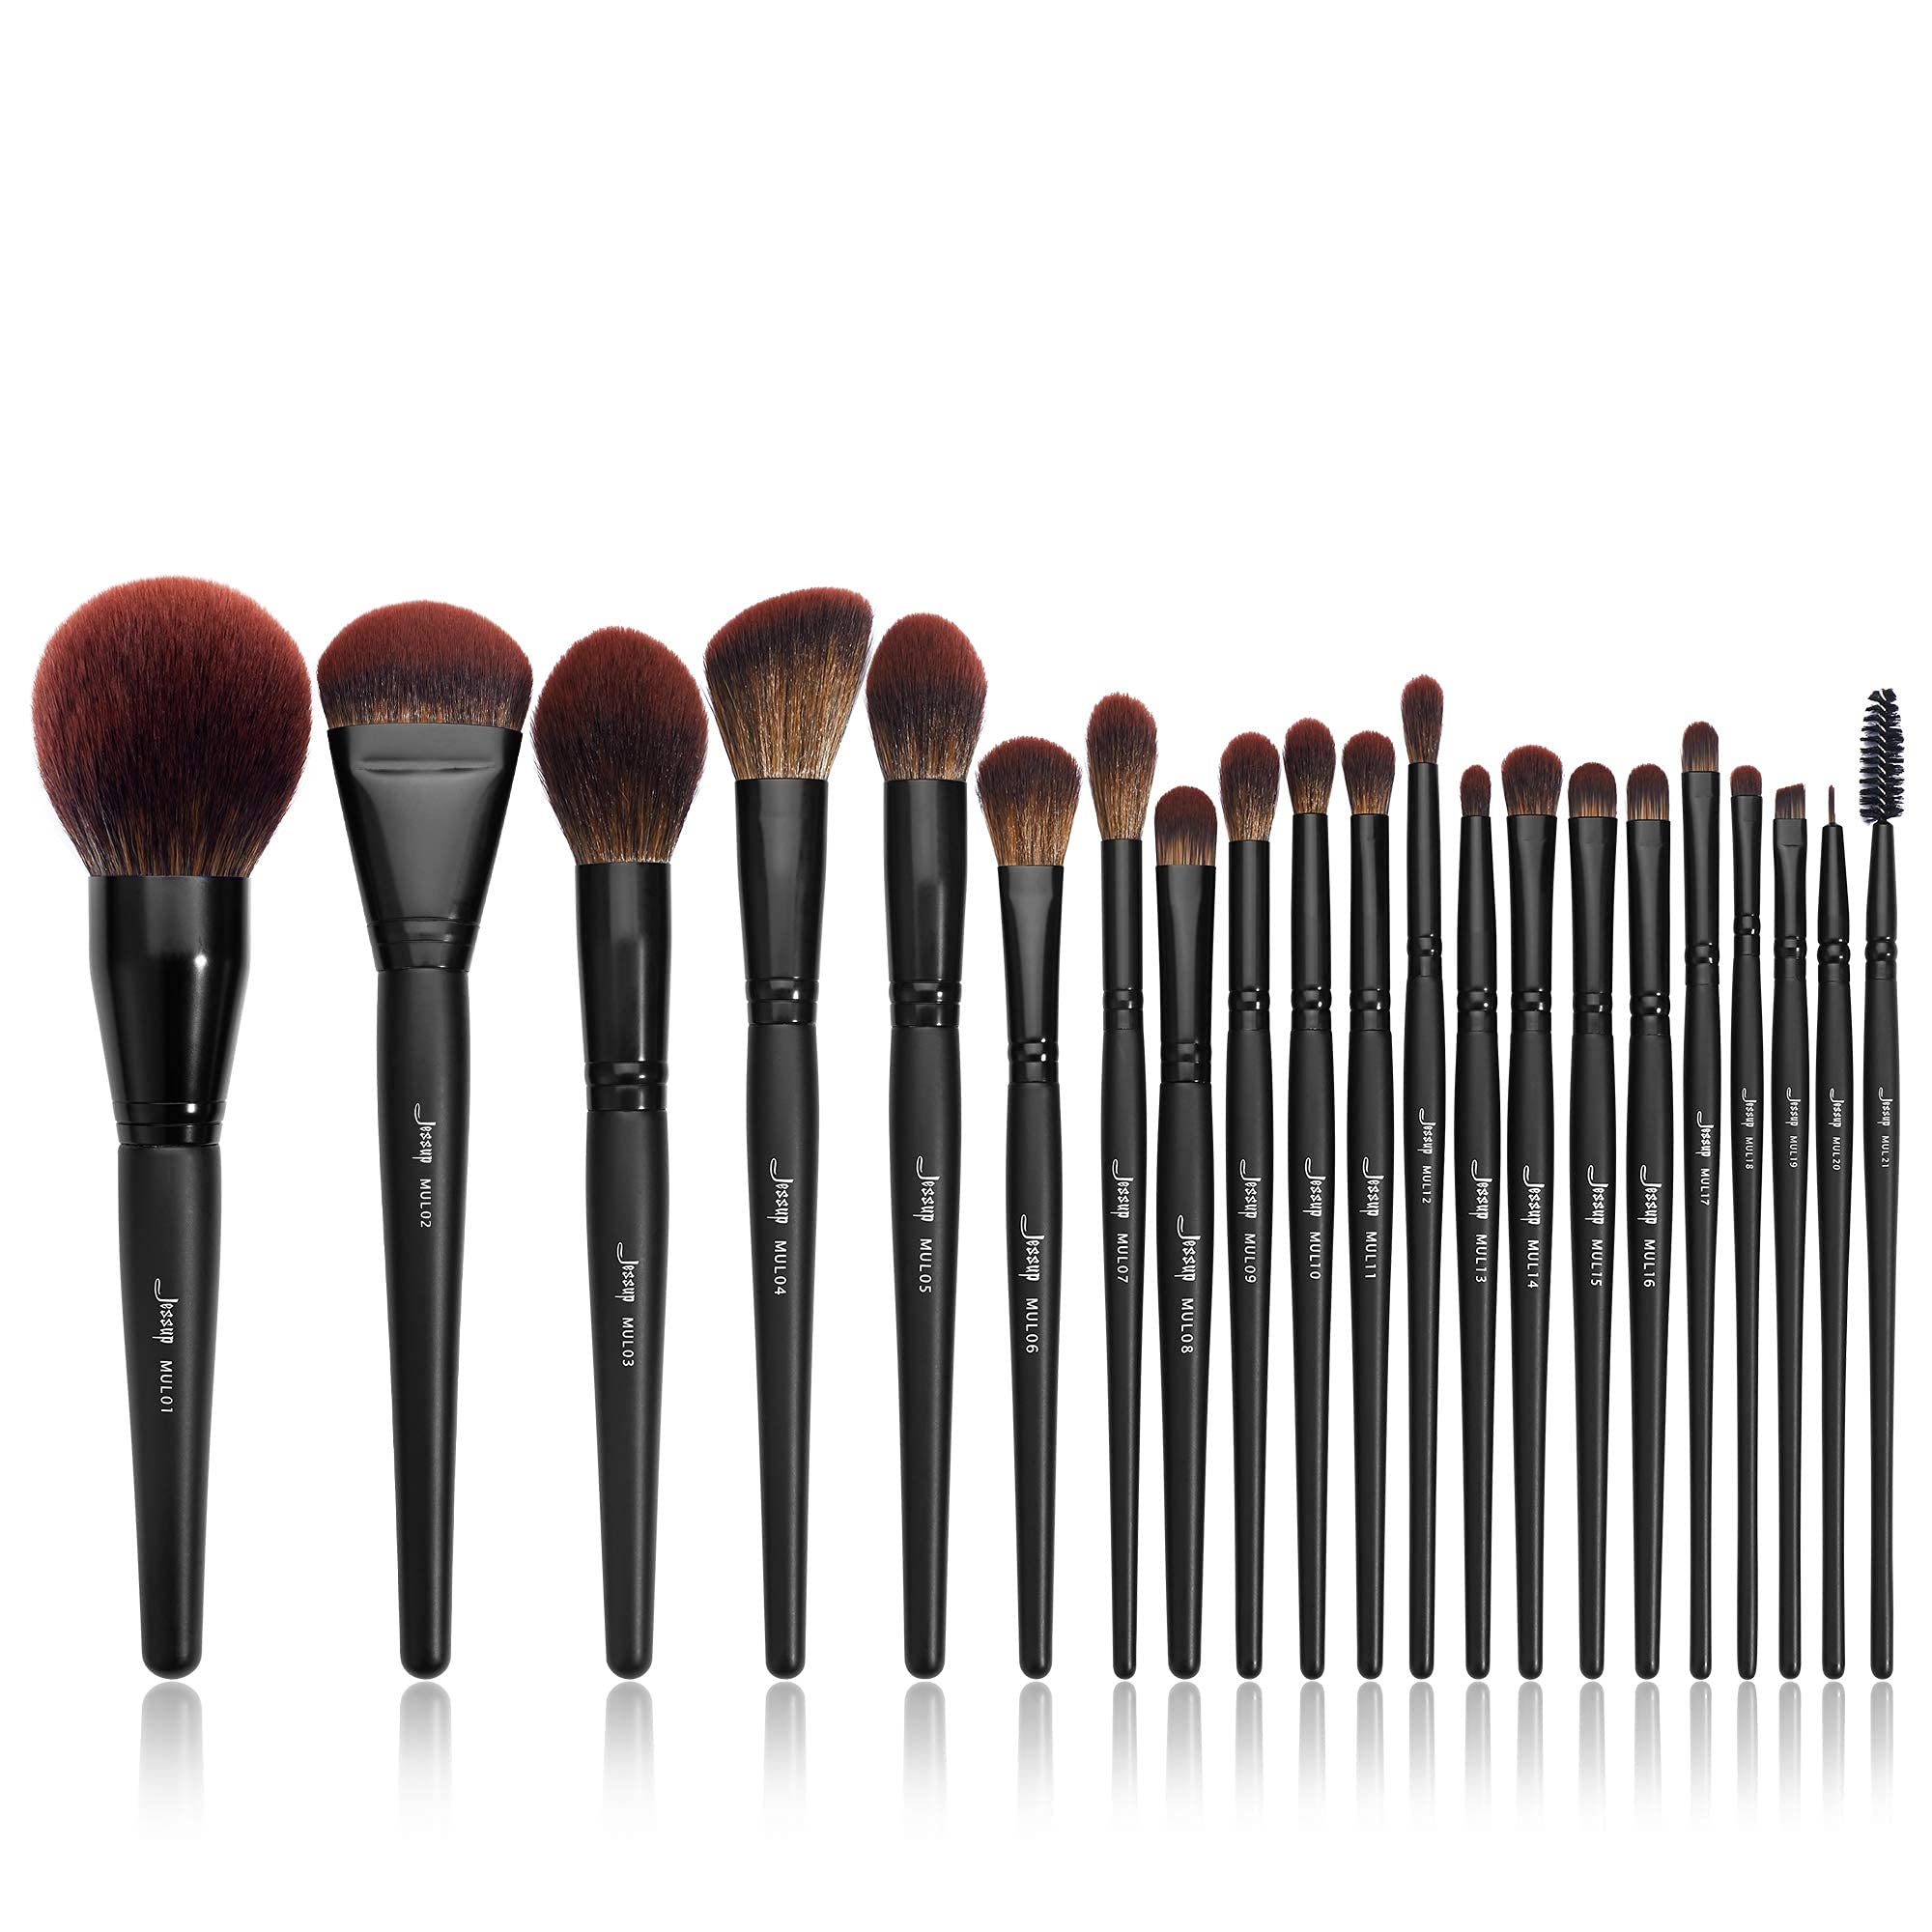 Jessup Make Up Brush Set Professional 21Pcs Black Complete Collection,Synthetic Hair,Powder Blending Foundation Highlight Contour Concealer Eyeshadow Eye liner Spoolie T271